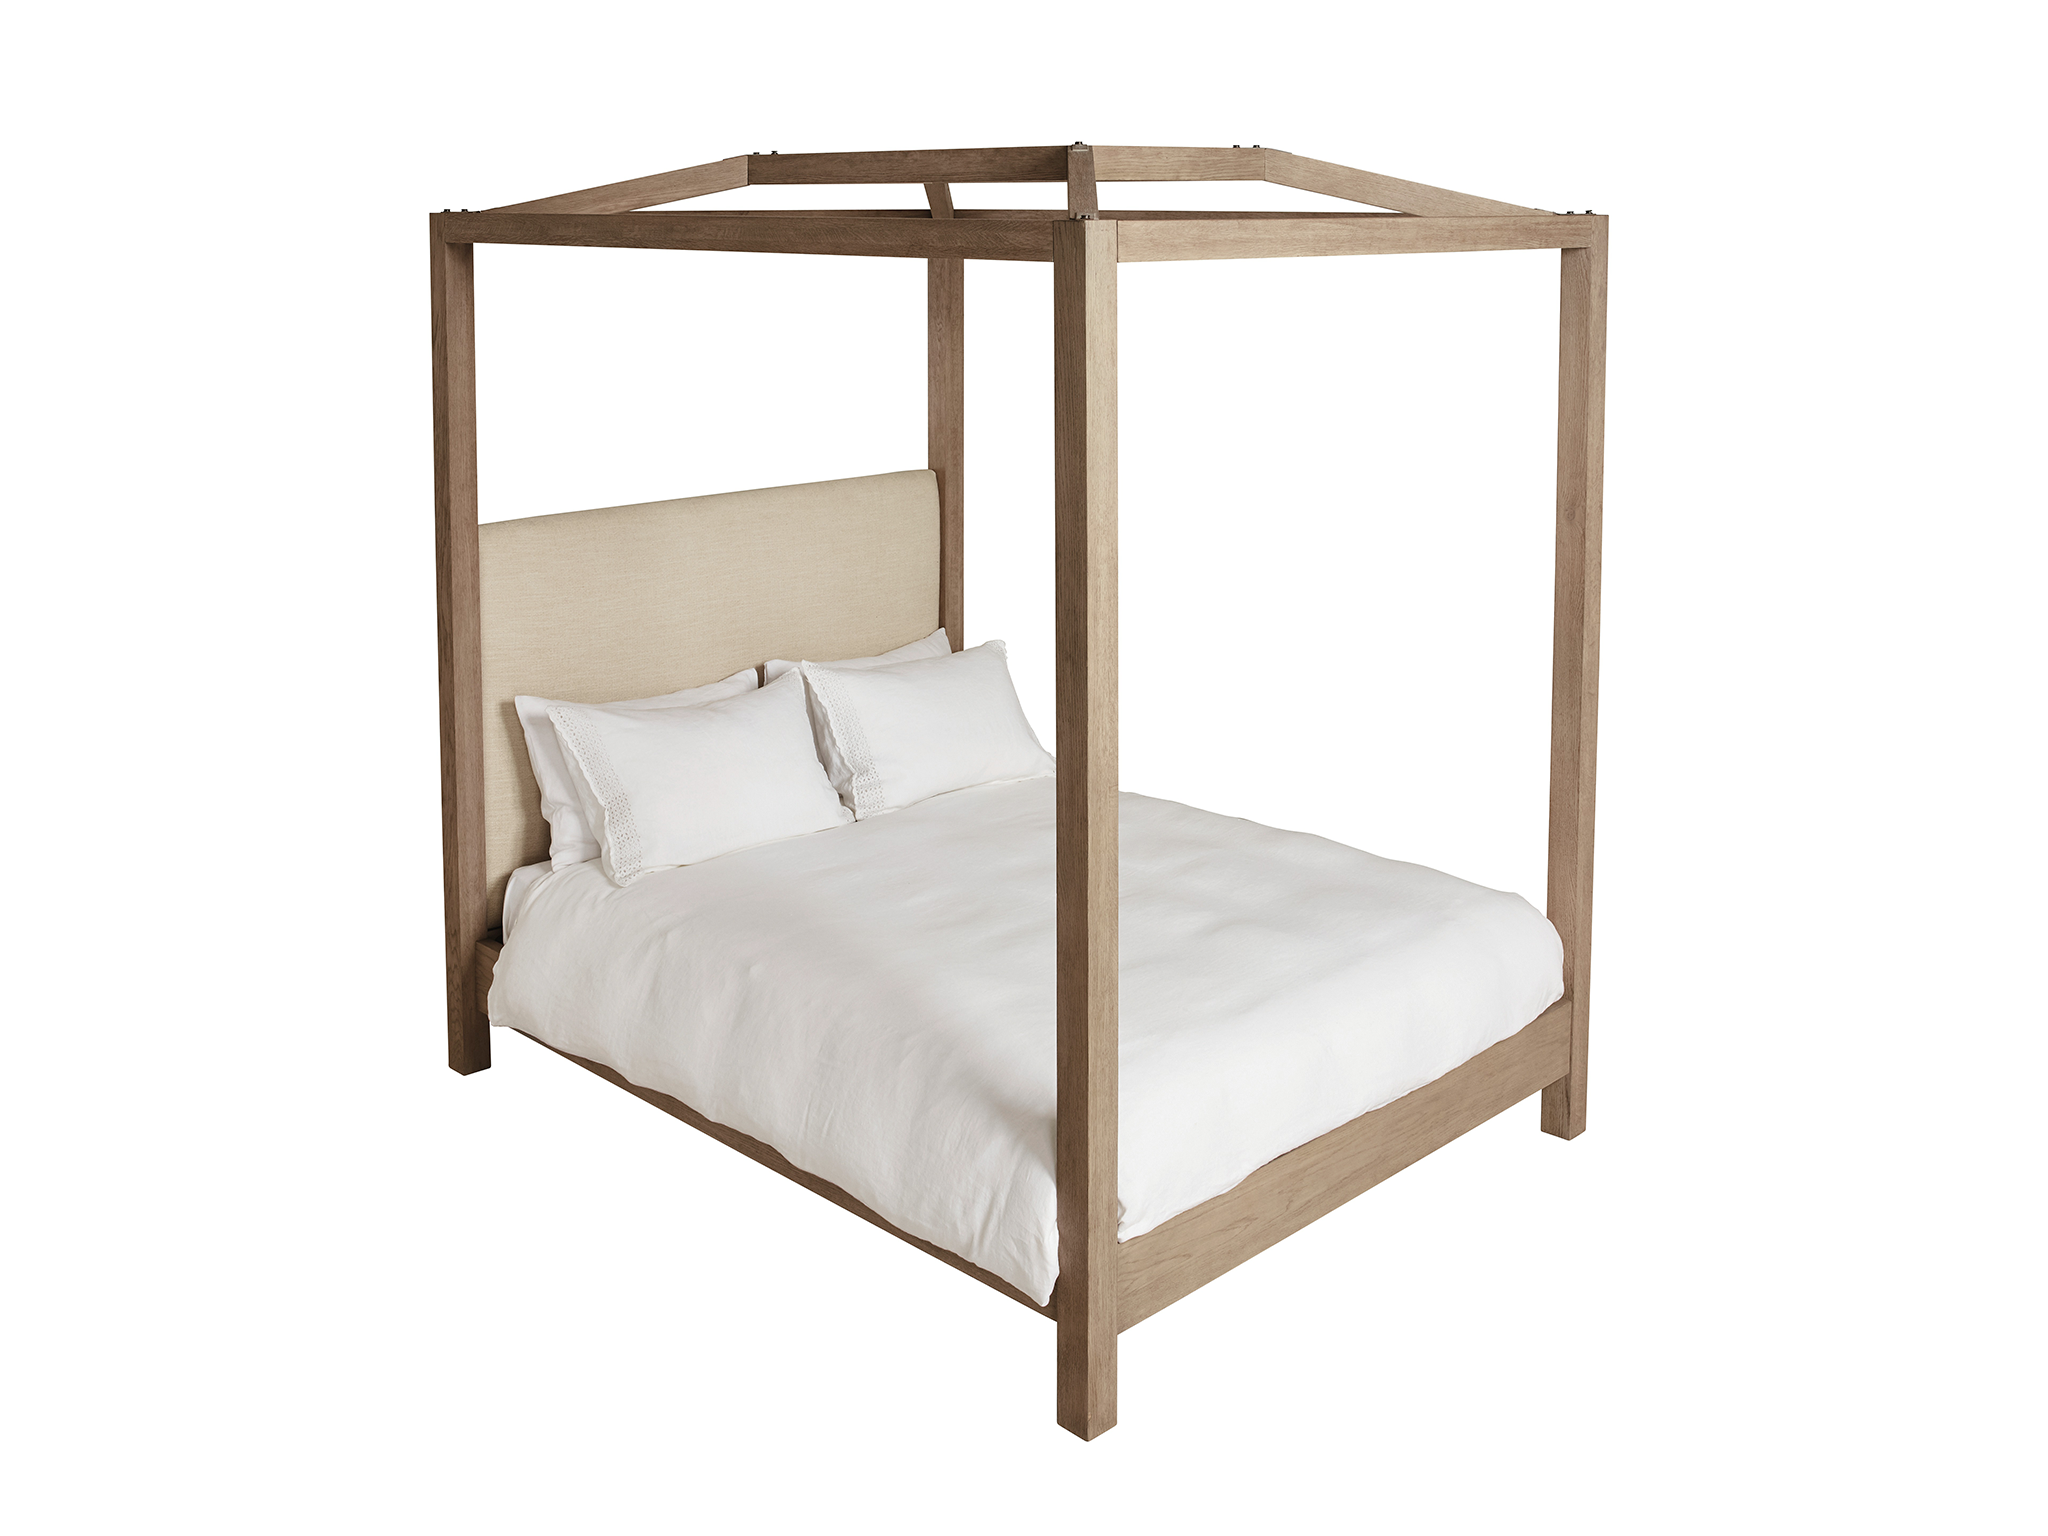 Oka Hester four-poster bed, king size, natural